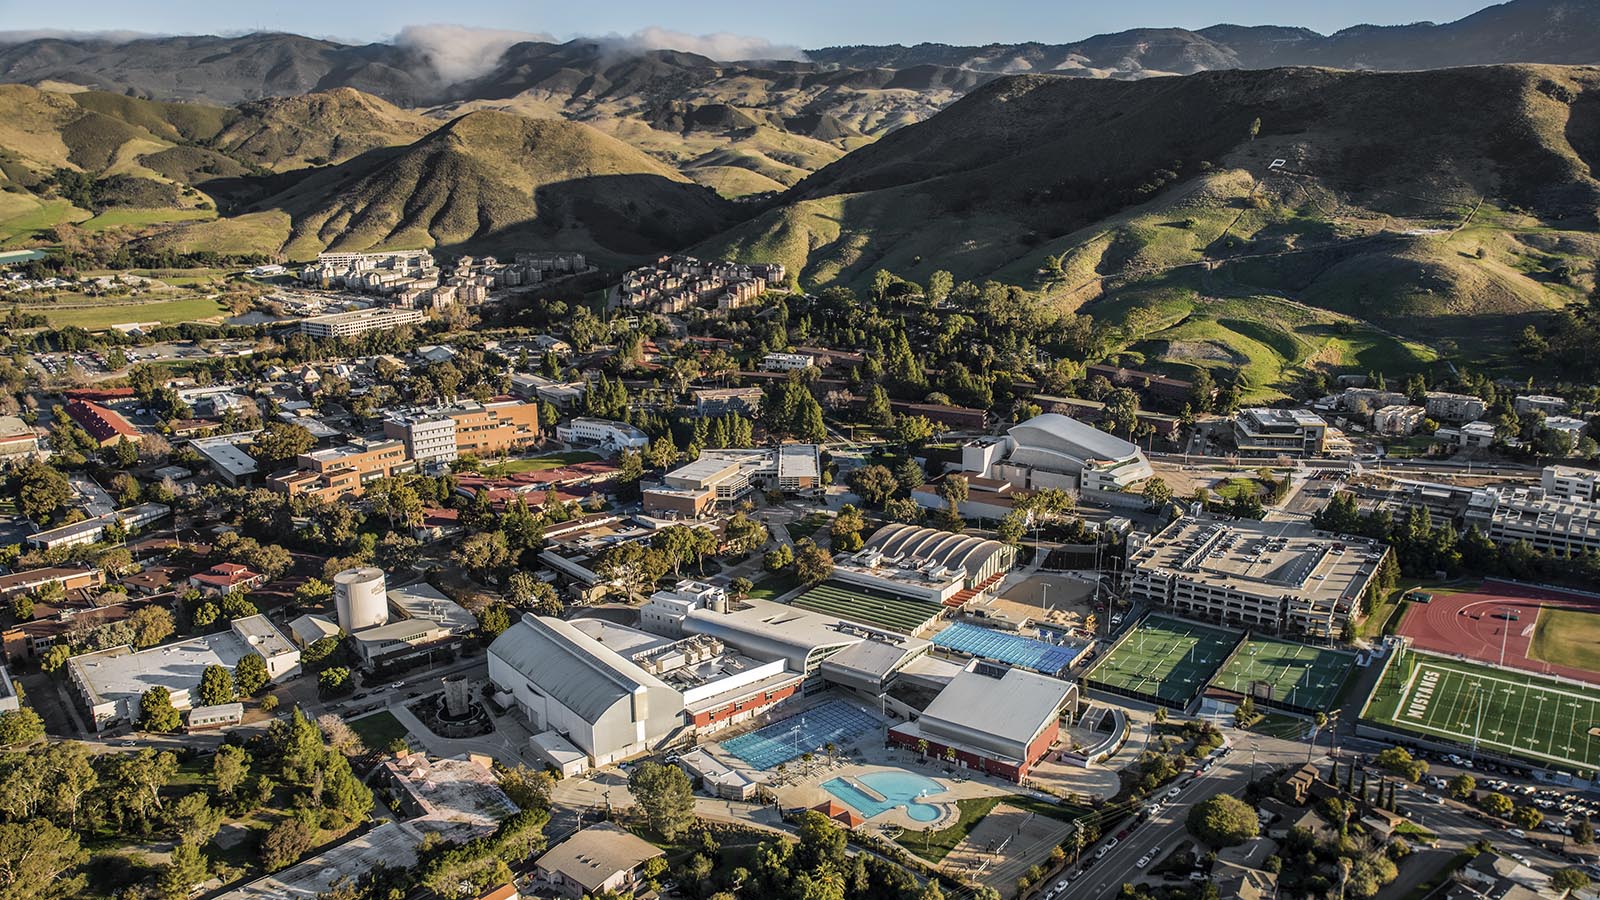 cal poly travel